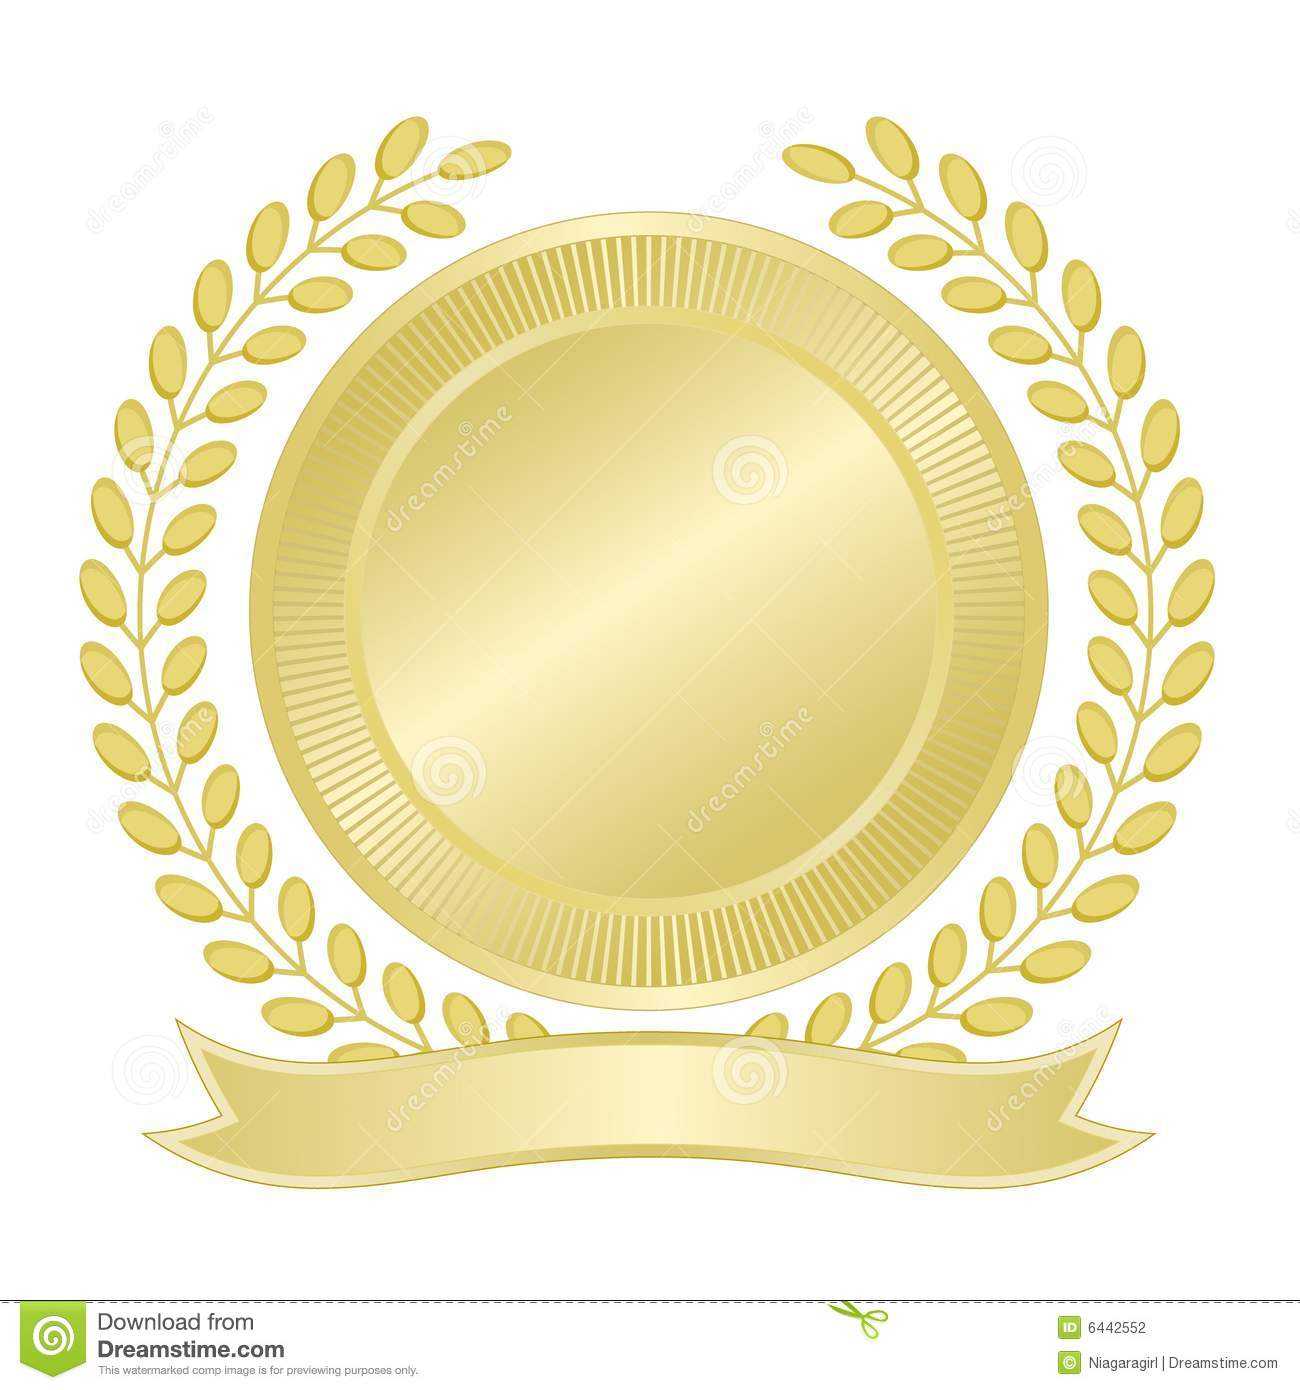 Blank Gold Seal Stock Vector. Illustration Of Seal, Wreath With Regard To Blank Seal Template